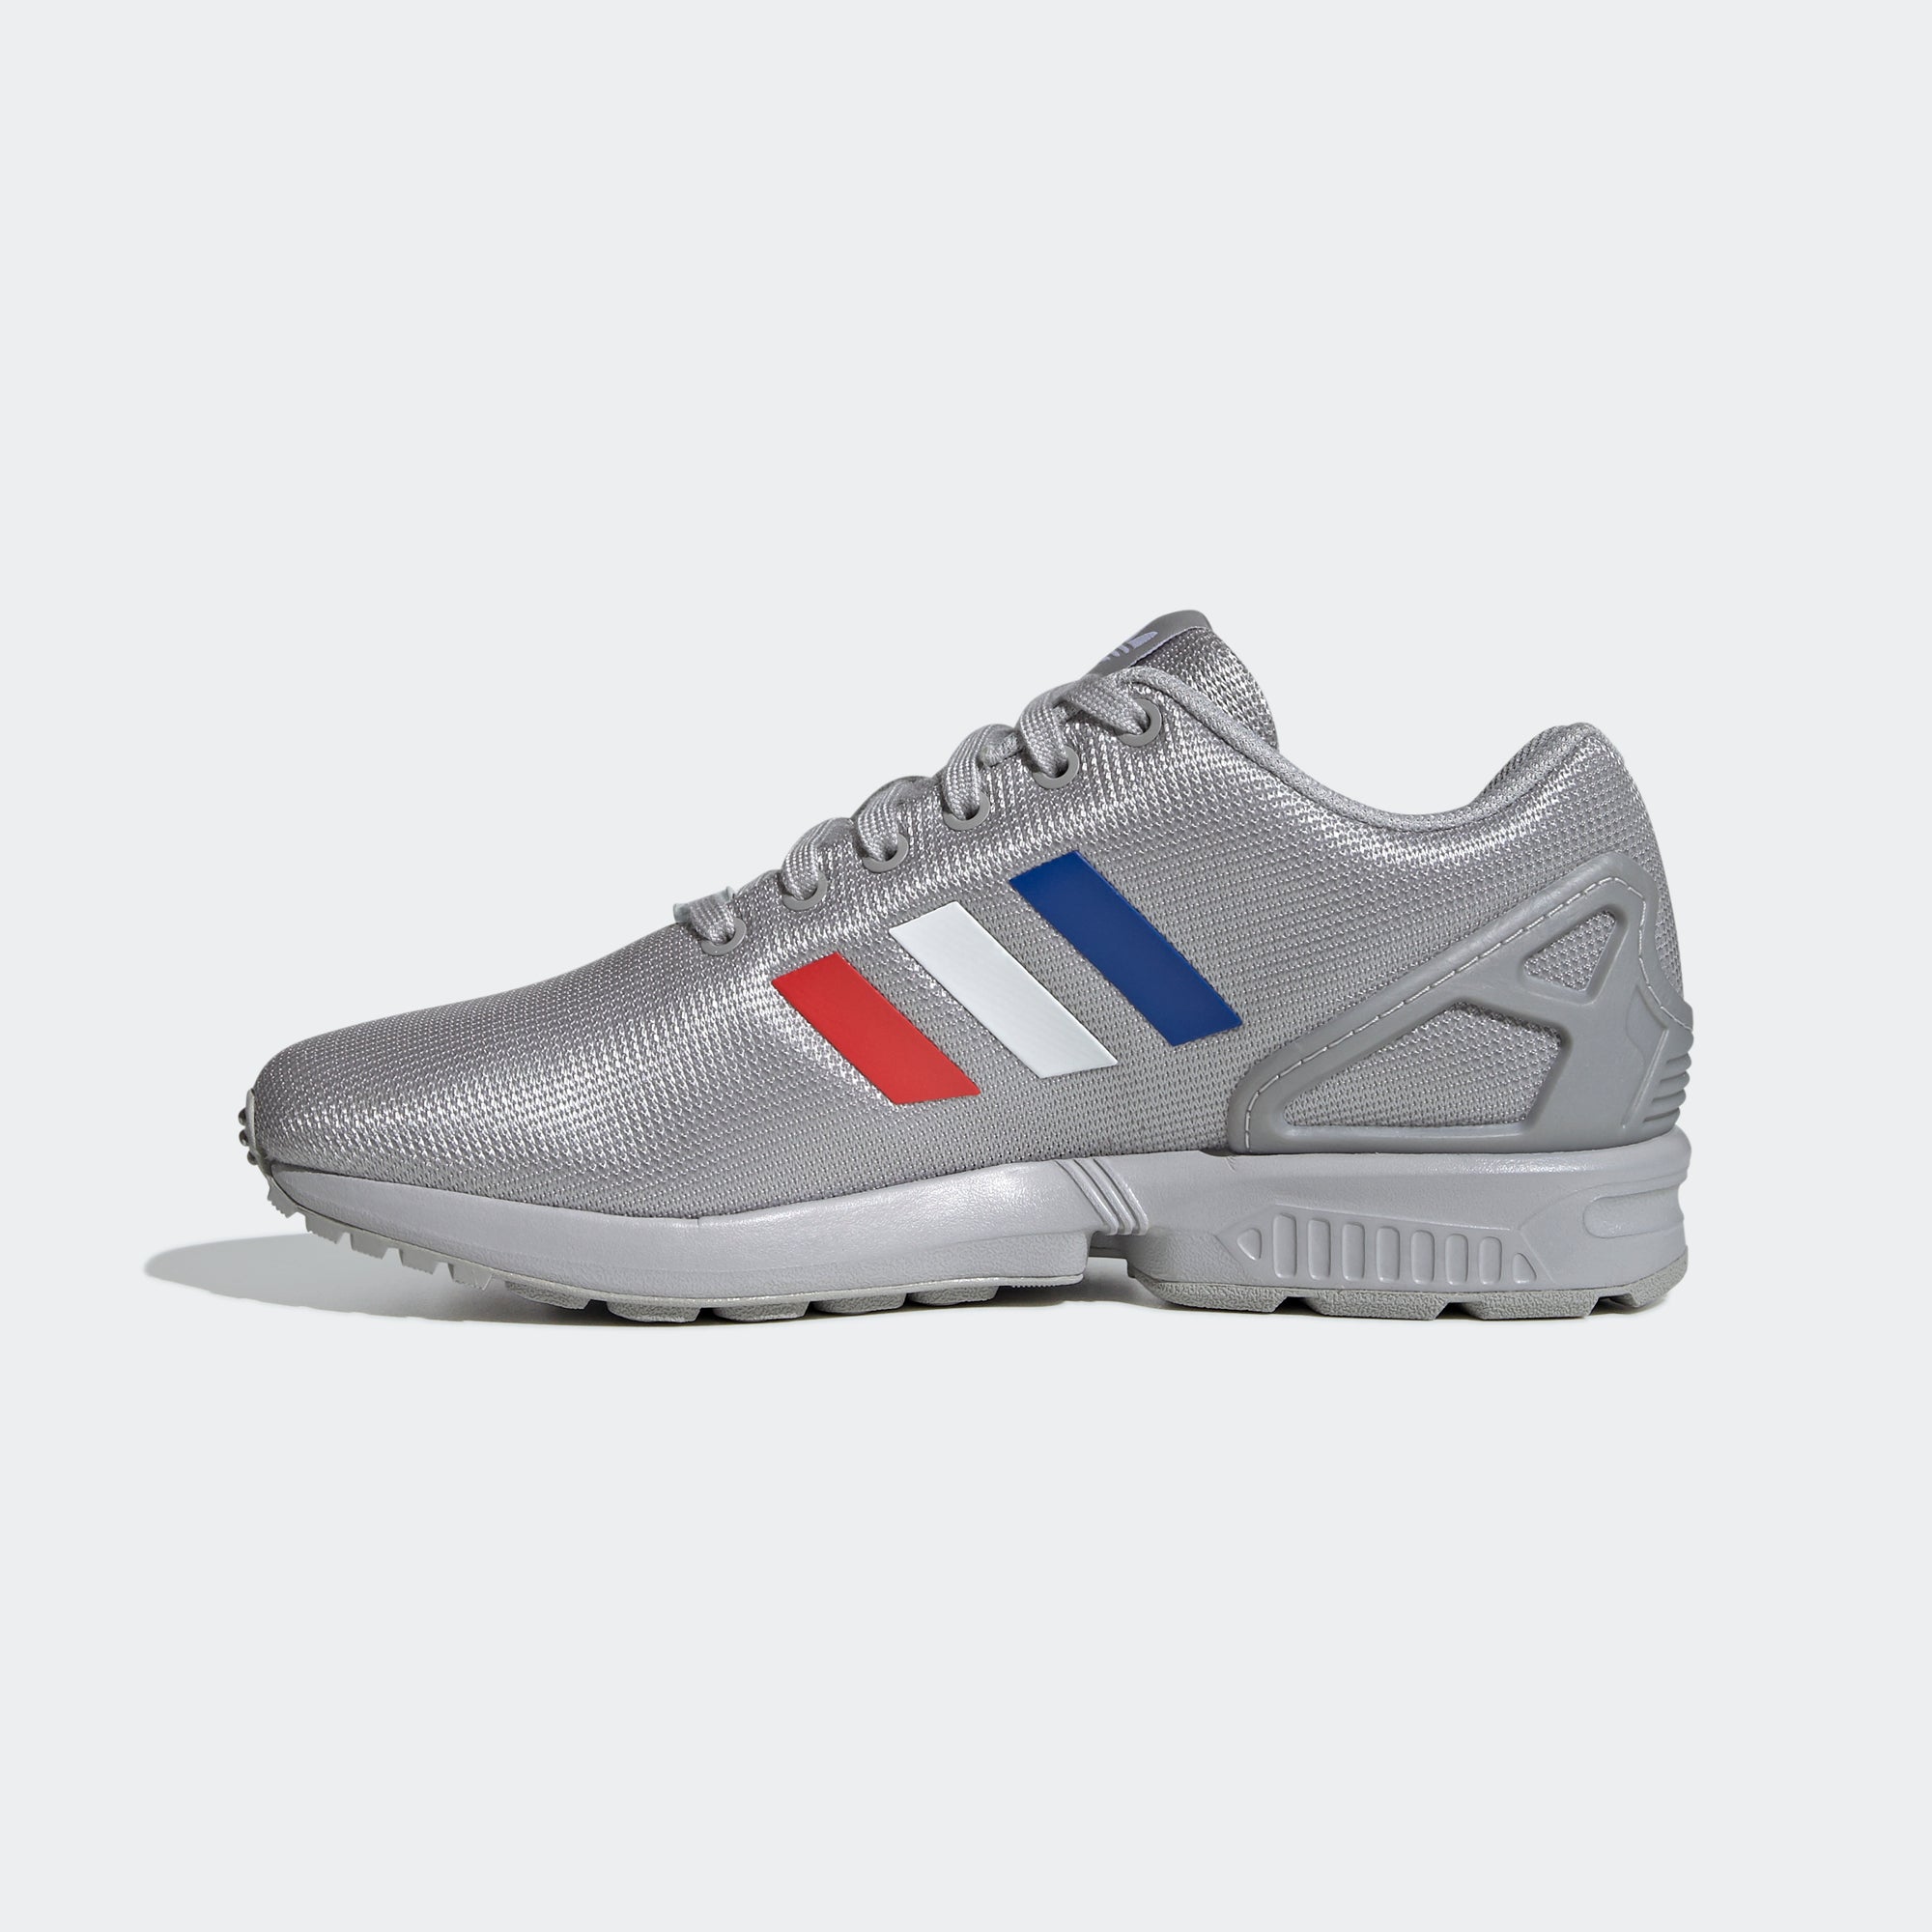 Betasten tint lus adidas ZX Flux Shoes Grey | Chicago City Sports